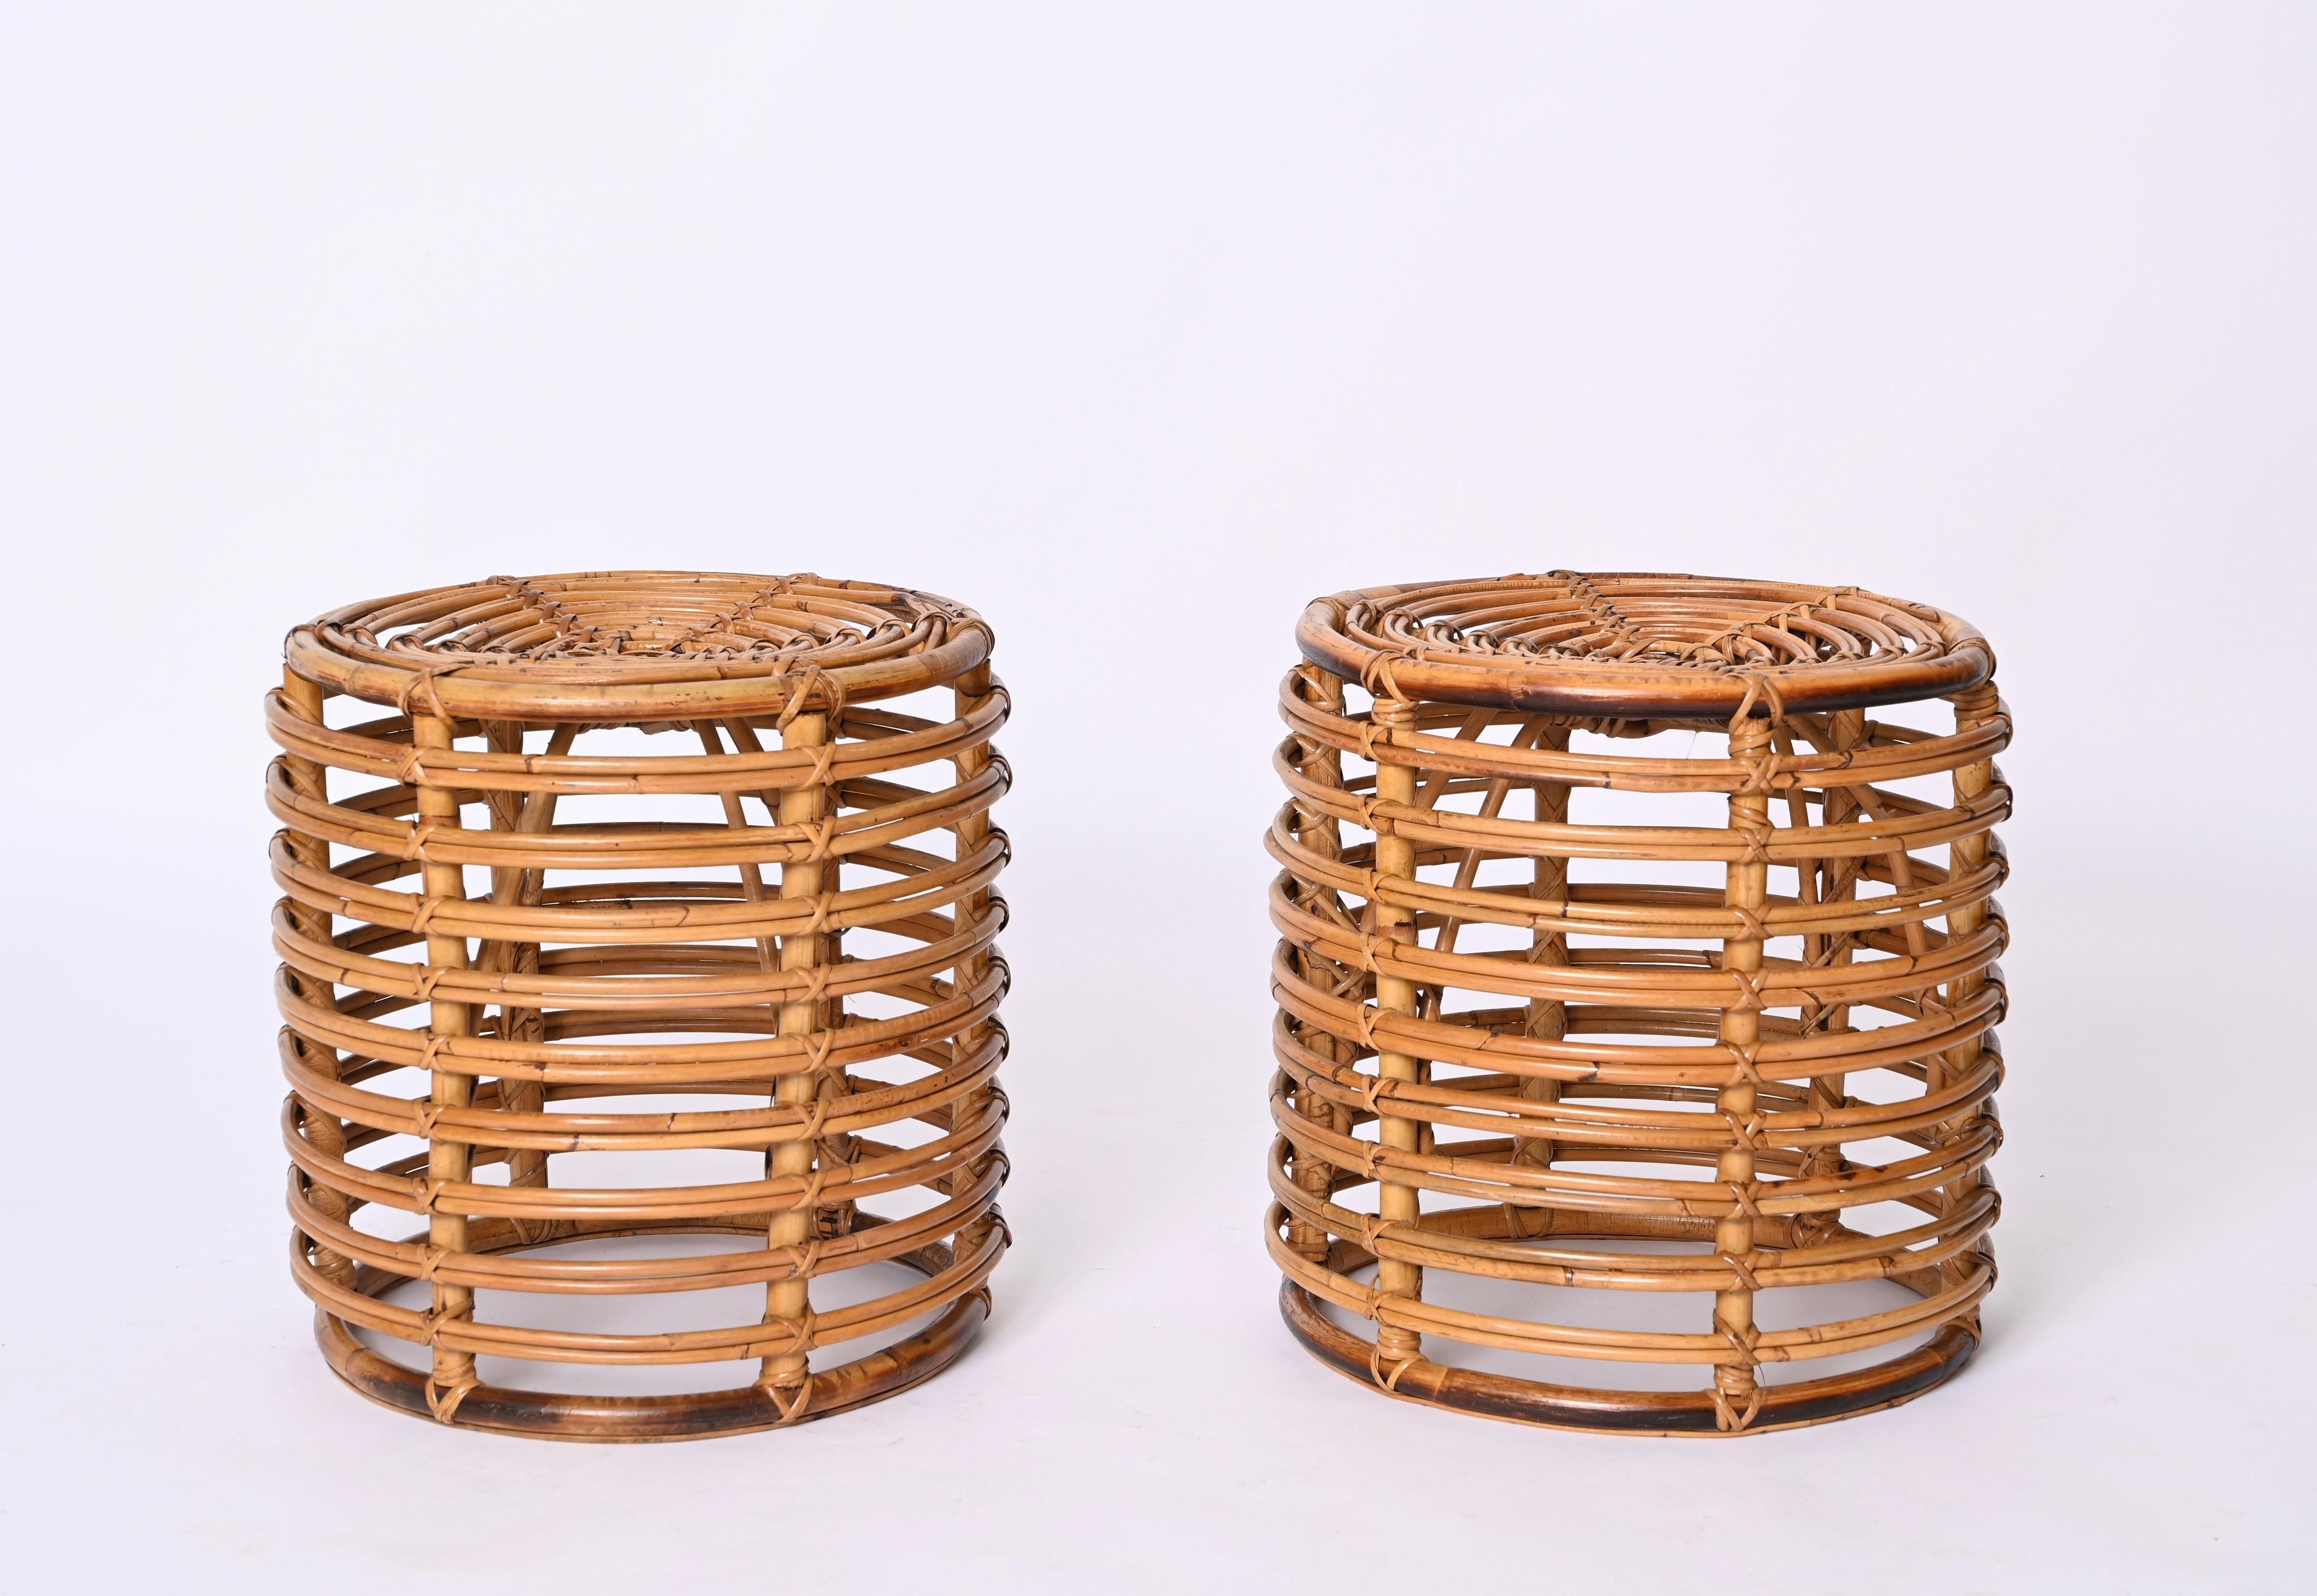 Tito Agnoli Rare and beautiful midcentury stool chairs. This fantastic set was made in Italy during the 1960s.
The craftsmanship of these stools is exceptional and the bamboo structure allows each to be light and solid at the same time.
Fully